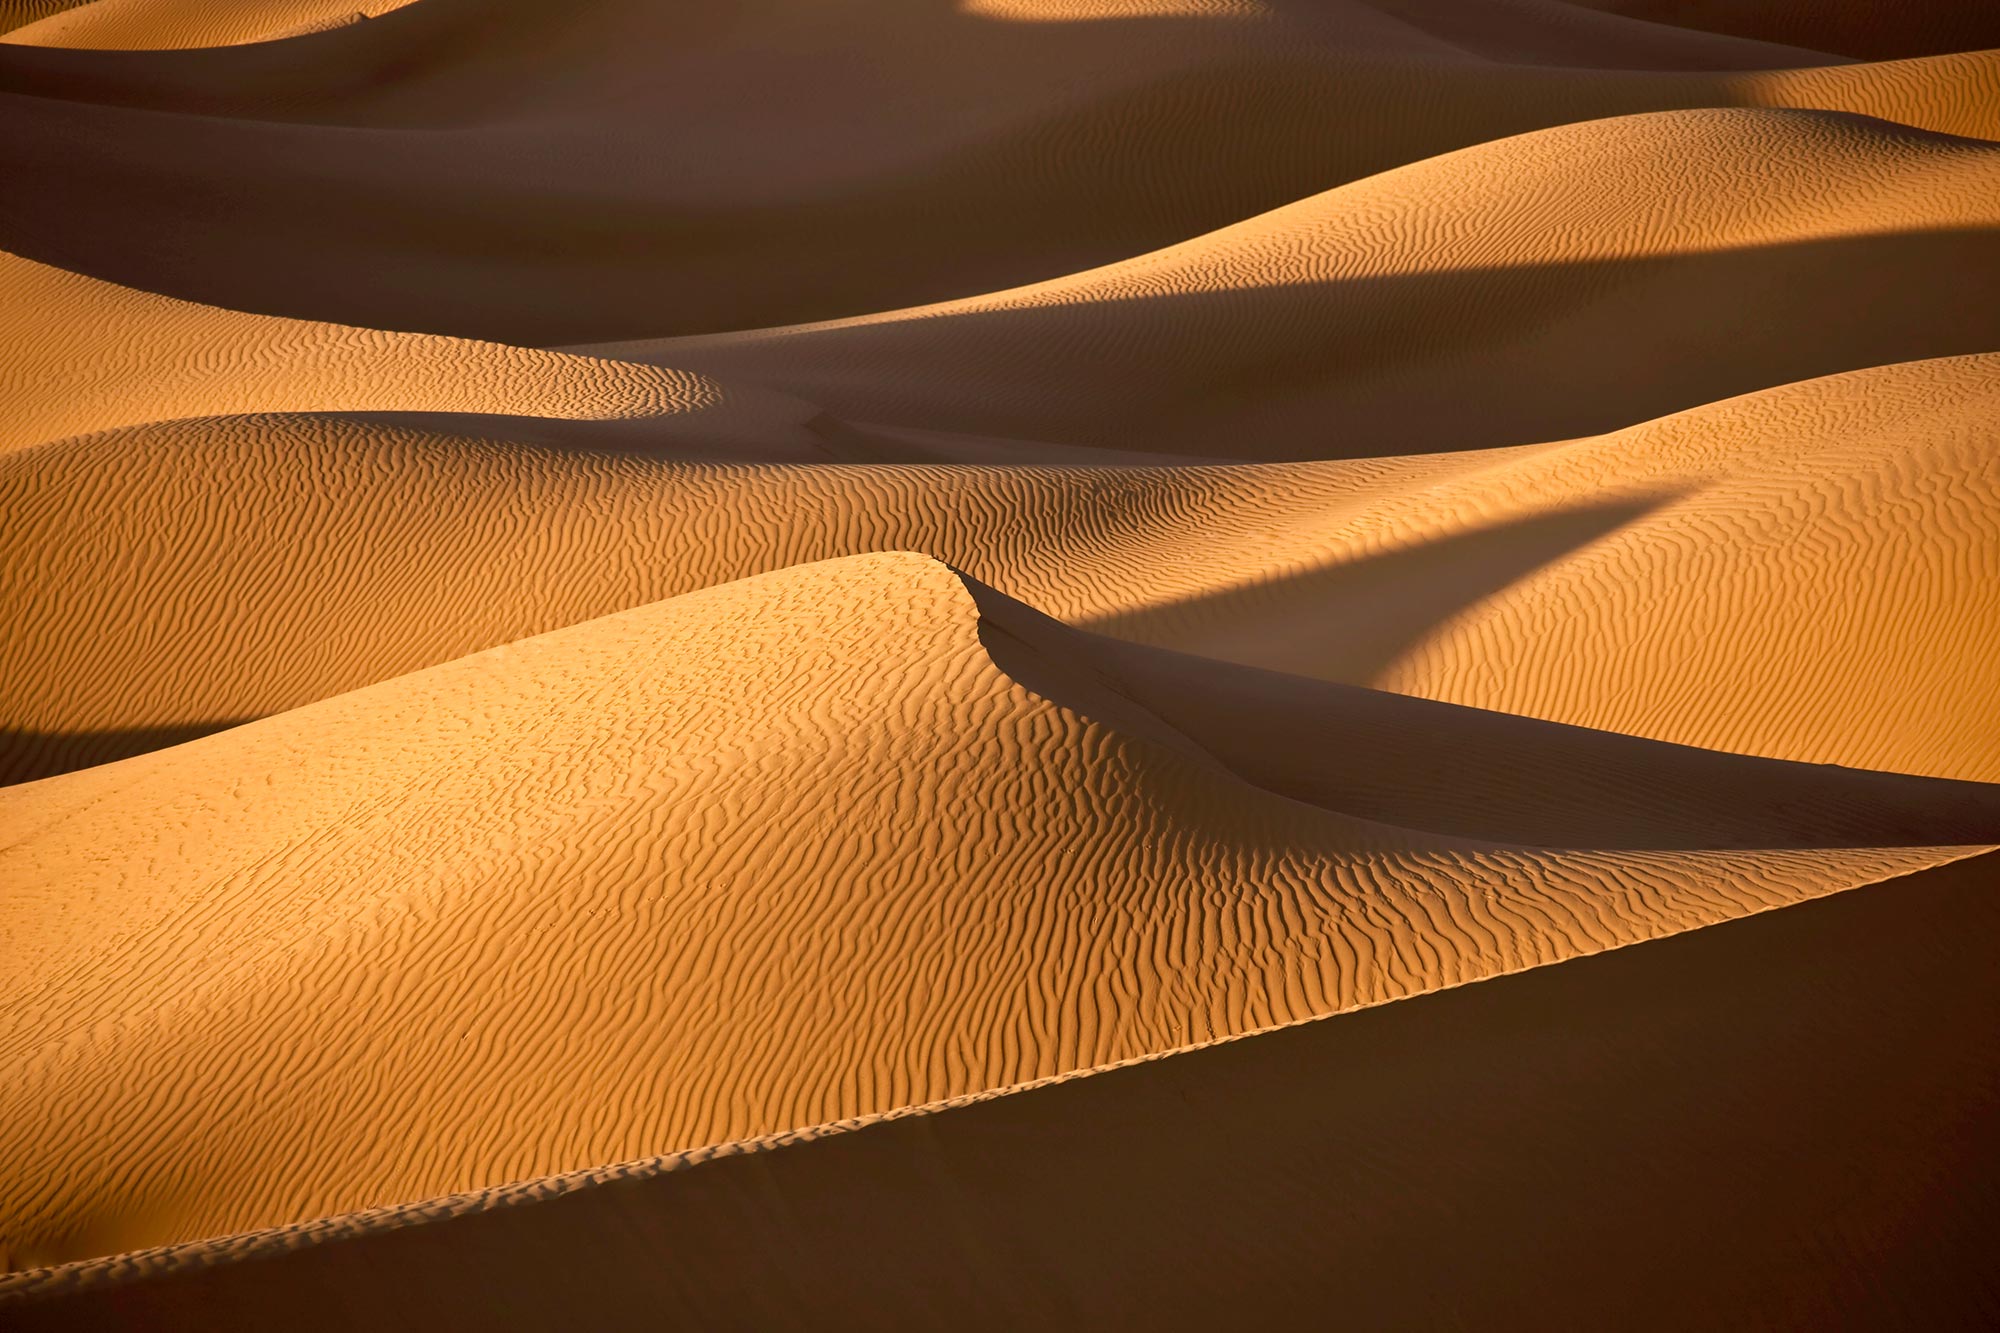 Physics Researchers Discover Sand Dunes Can Communicate With Each Other